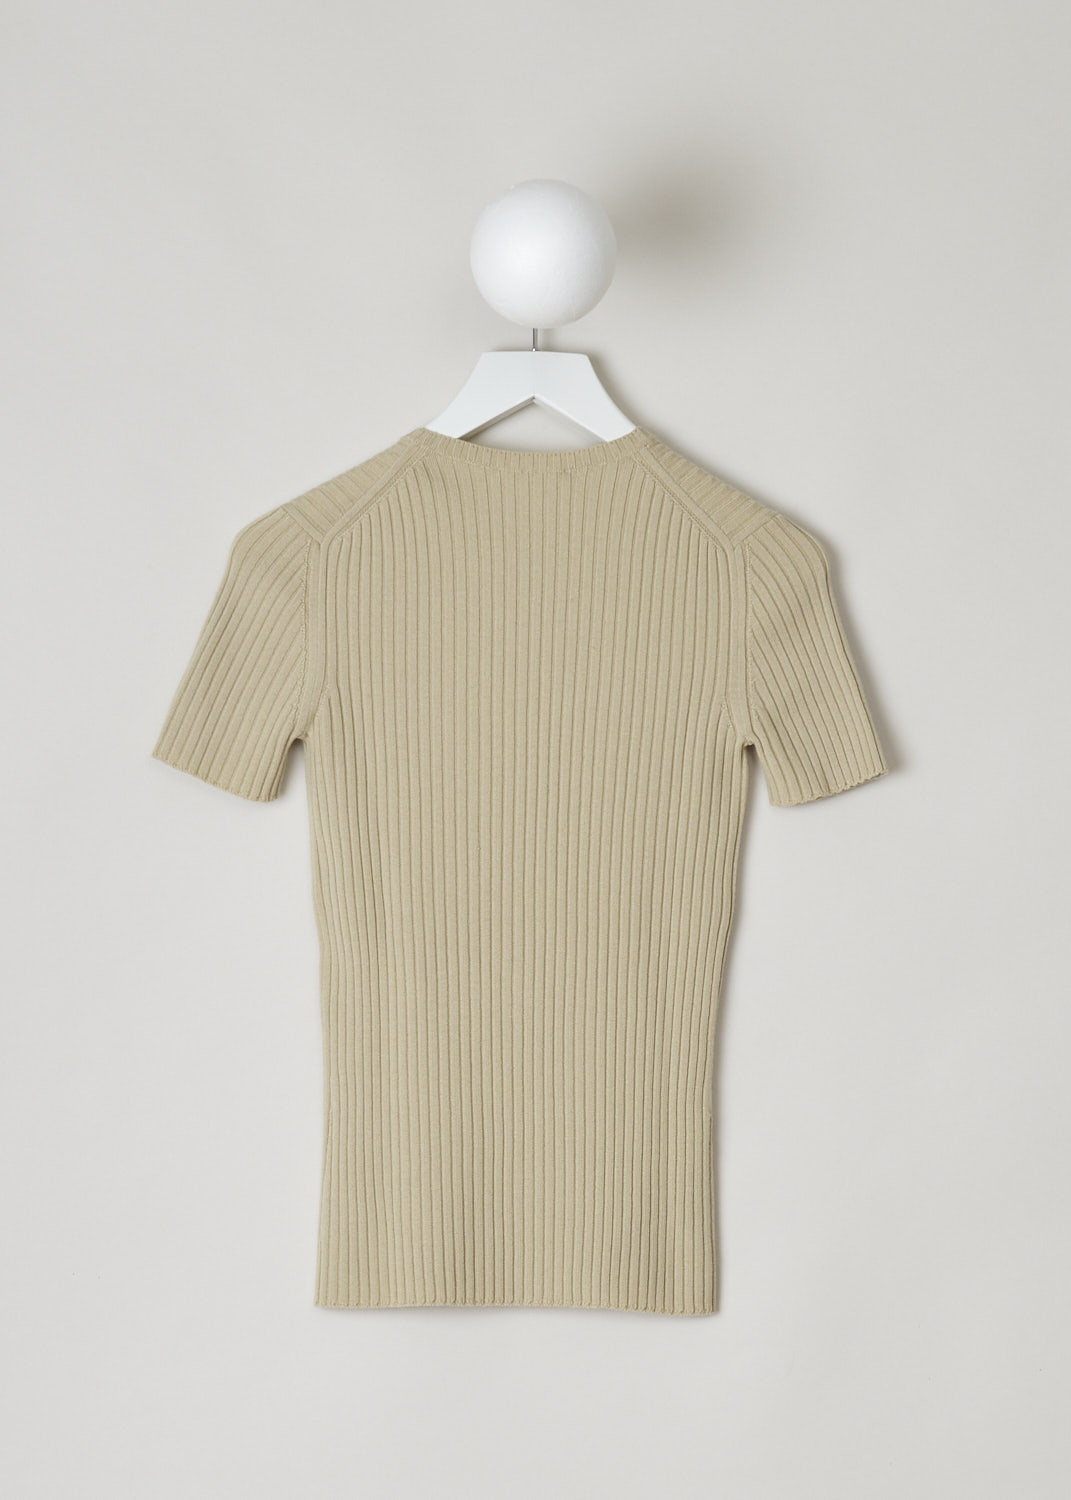 CHLOÃ‰, BEIGE RIBBED TOP, CHC22UMP3865020M_PASTEL_PINK, Beige, Back, This beige ribbed top has a round neckline, short sleeves and a placket with functional ball buttons that go down the front to about midway. The top has an elongated cut.
